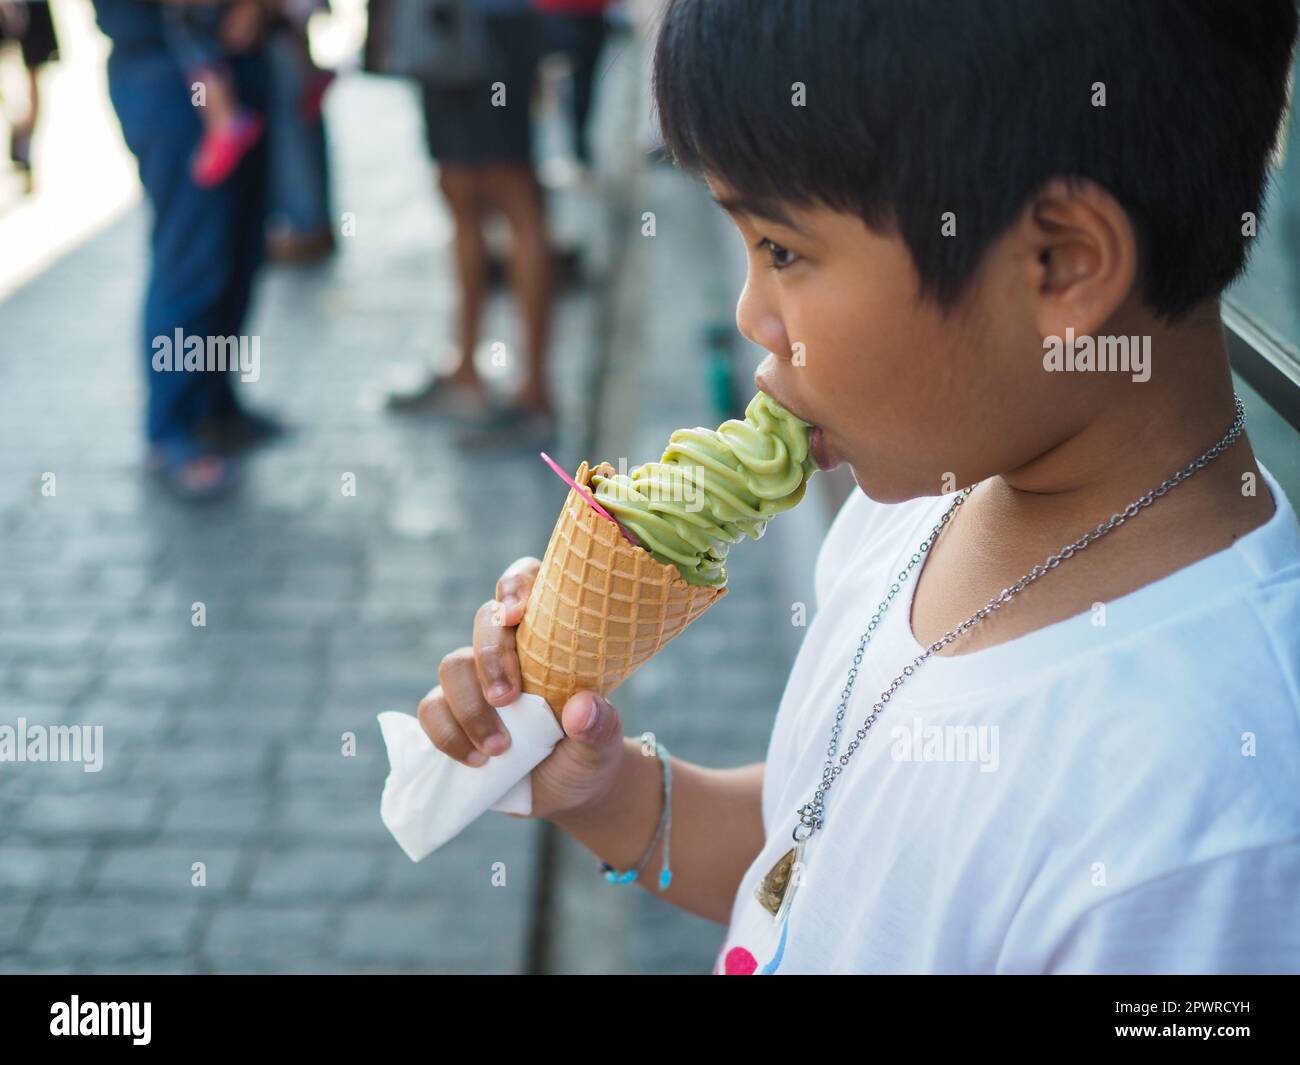 A Boy Wearing A White Shirt Is Eating Ice Cream Stock Photo